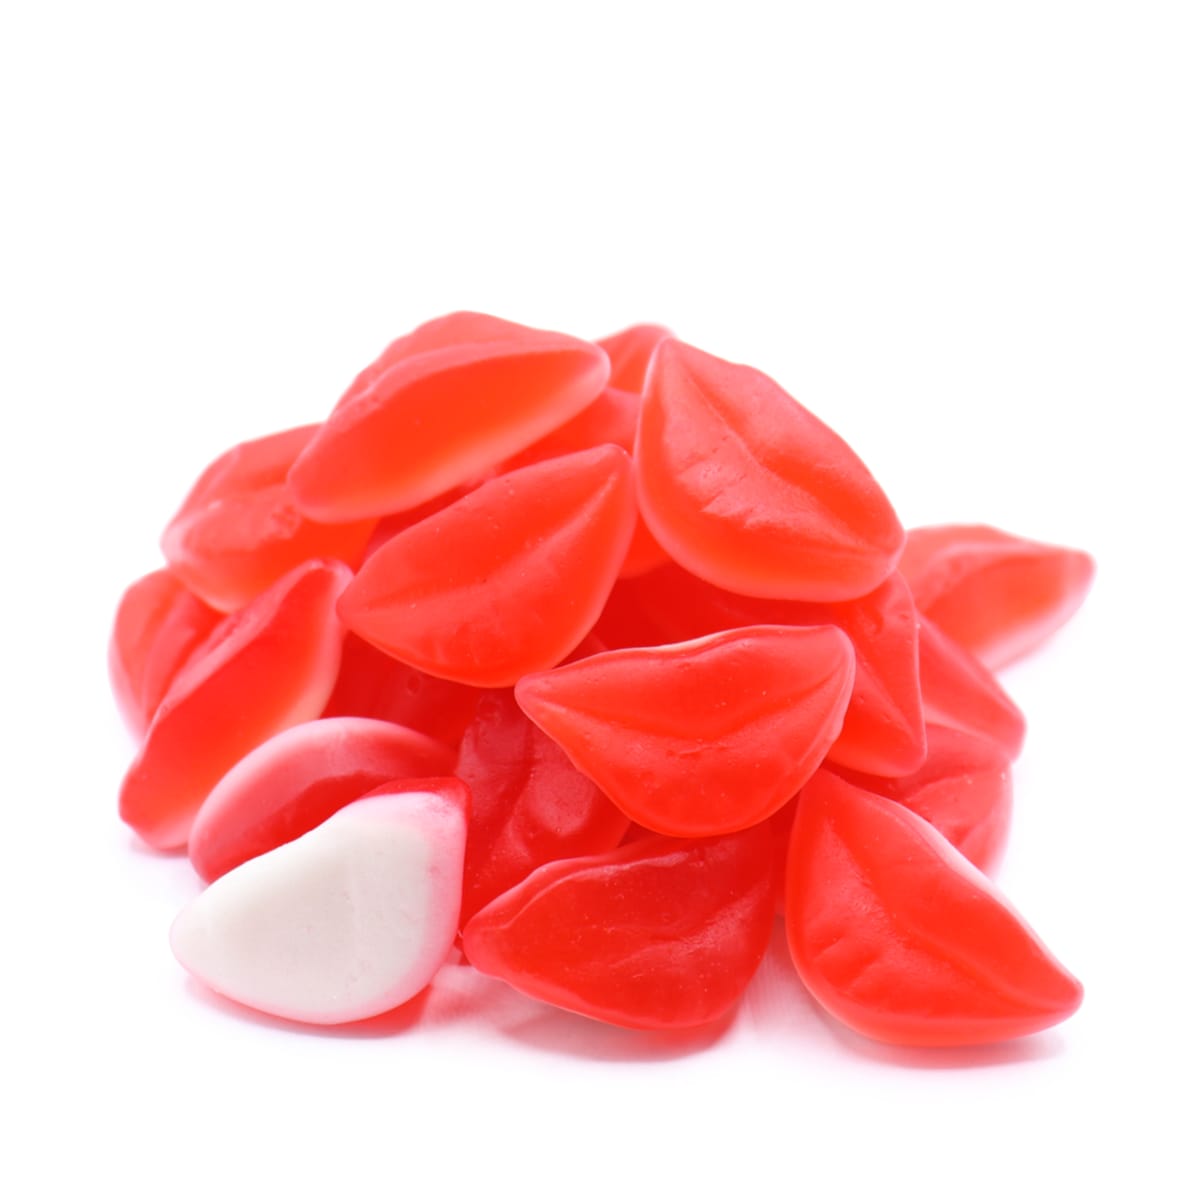 Awesome Blossoms Gummi Flowers - 5lbs